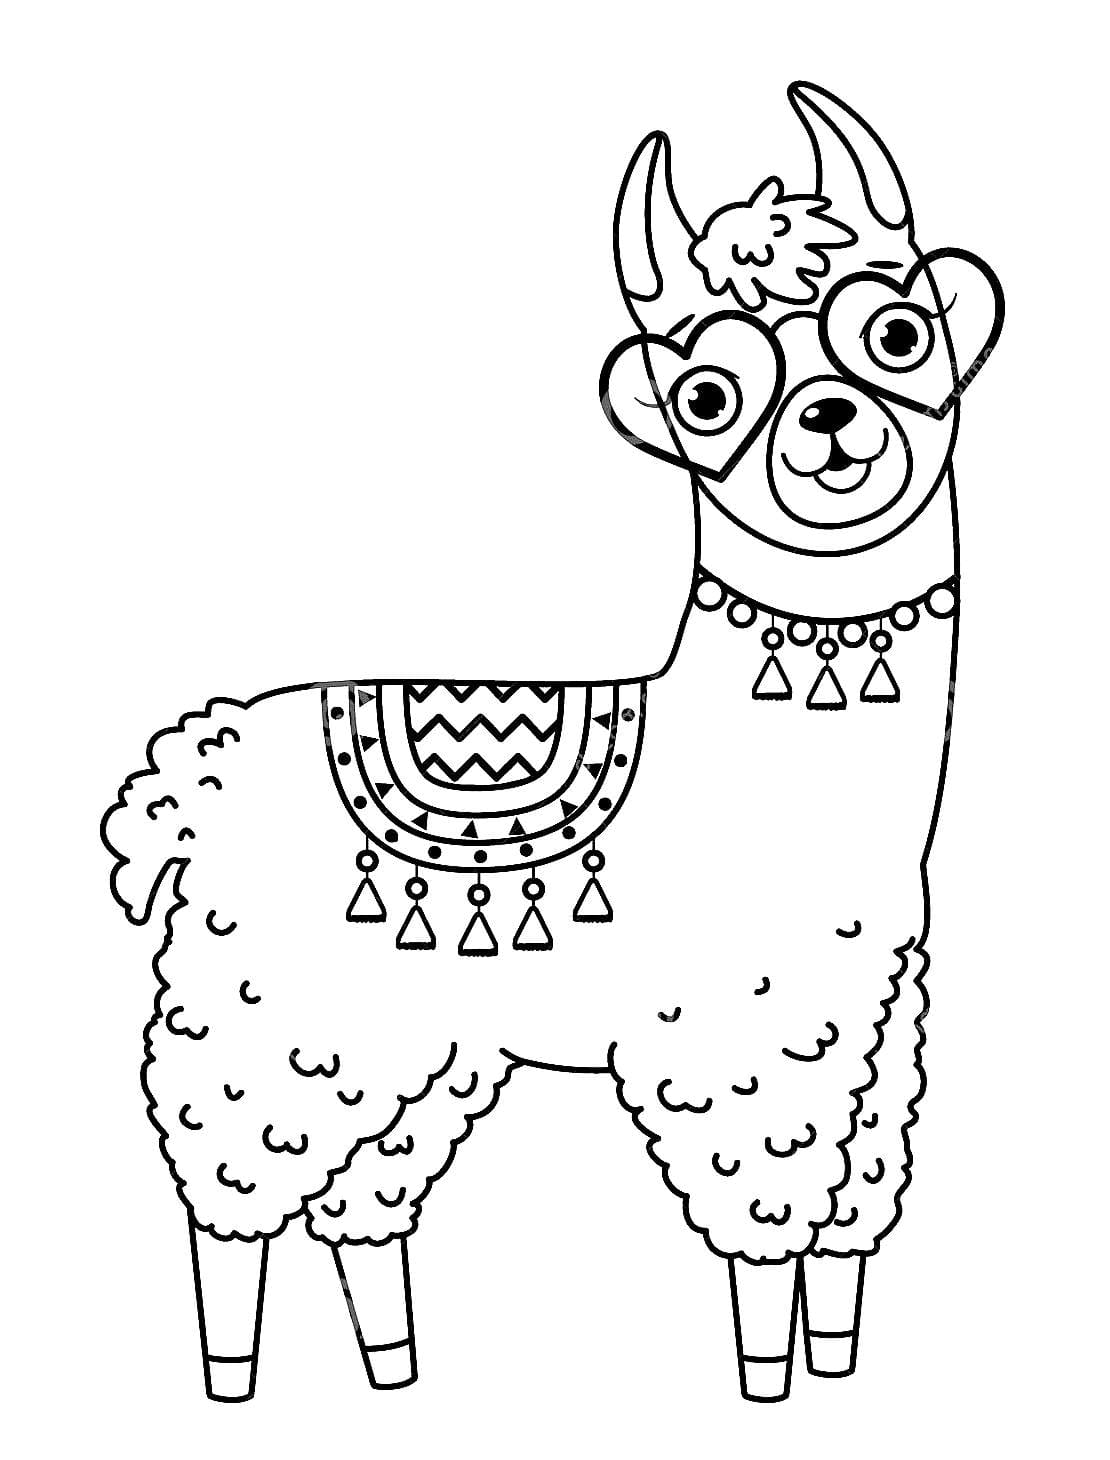 llama-coloring-pages-100-printable-coloring-pages